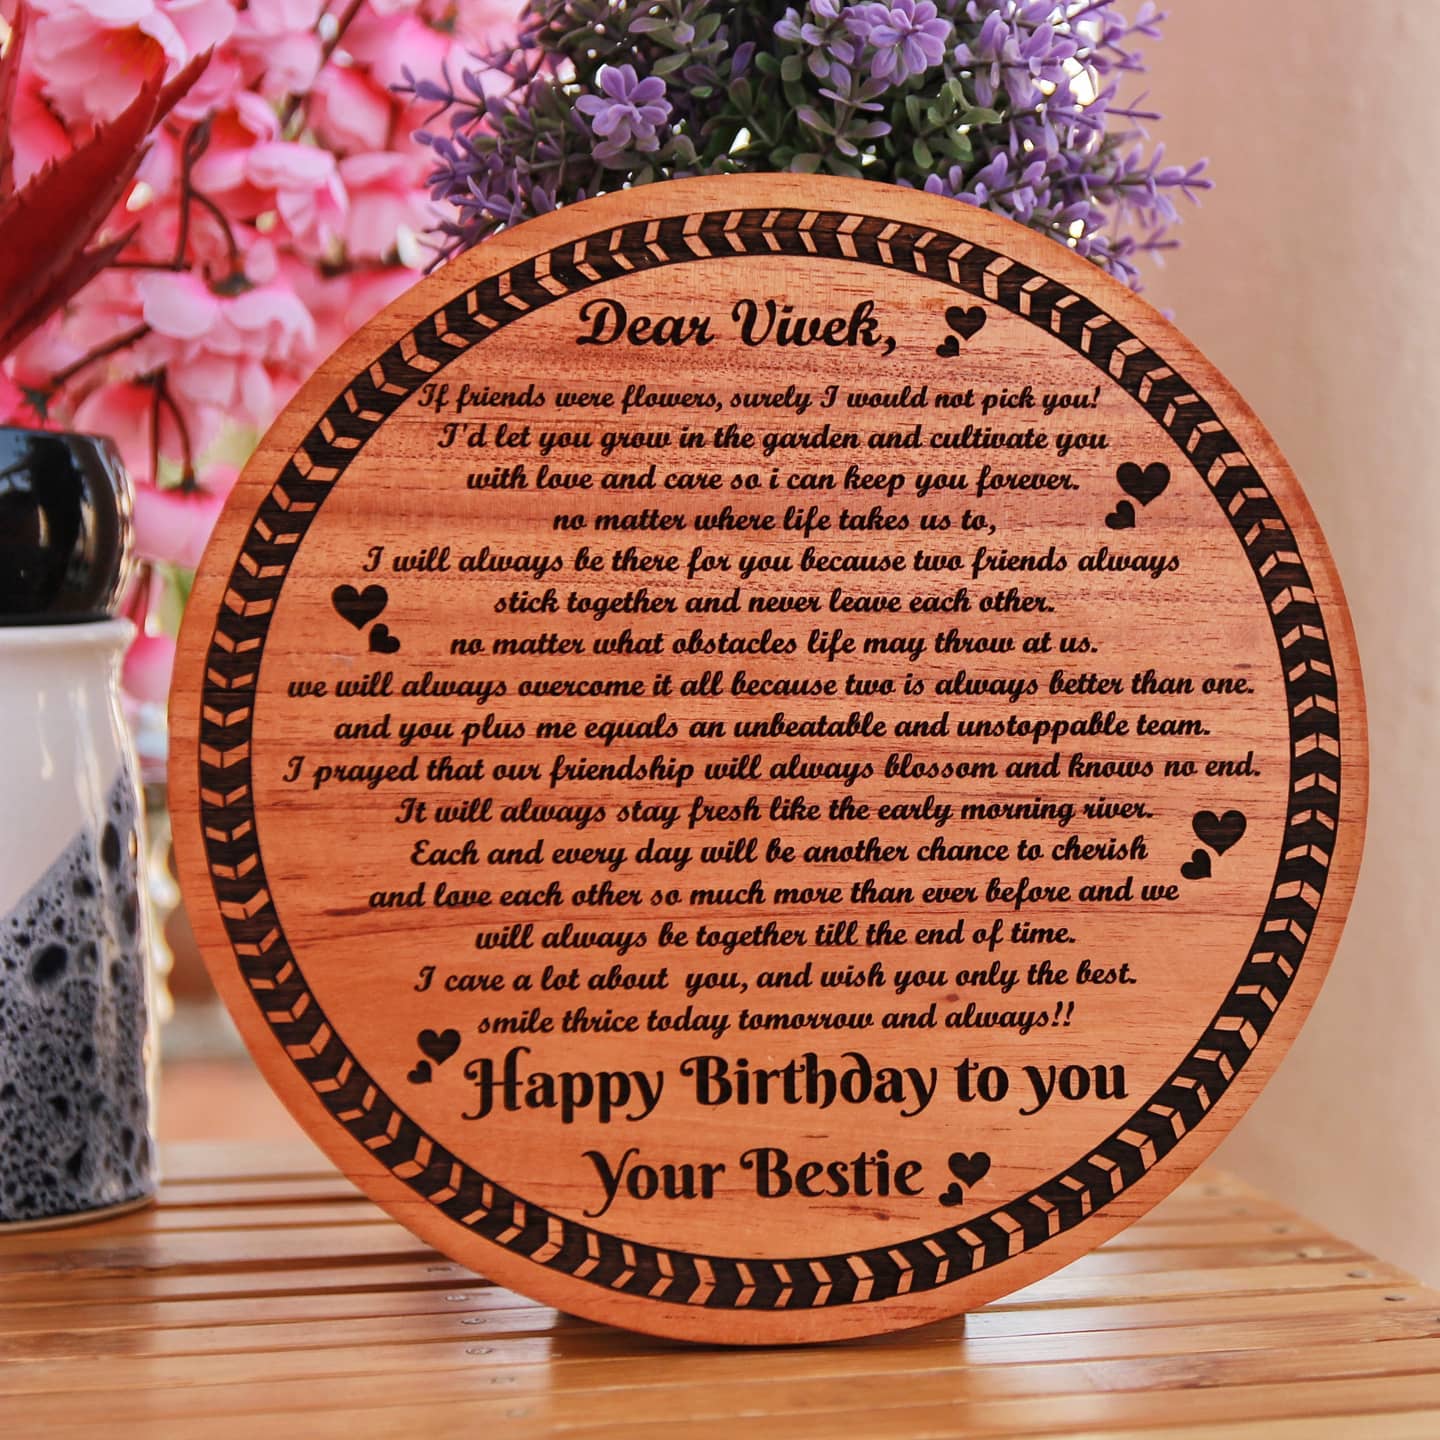 Birthday Letter To Friend Engraved in Wood | Birthday Gift | Letters On Wood